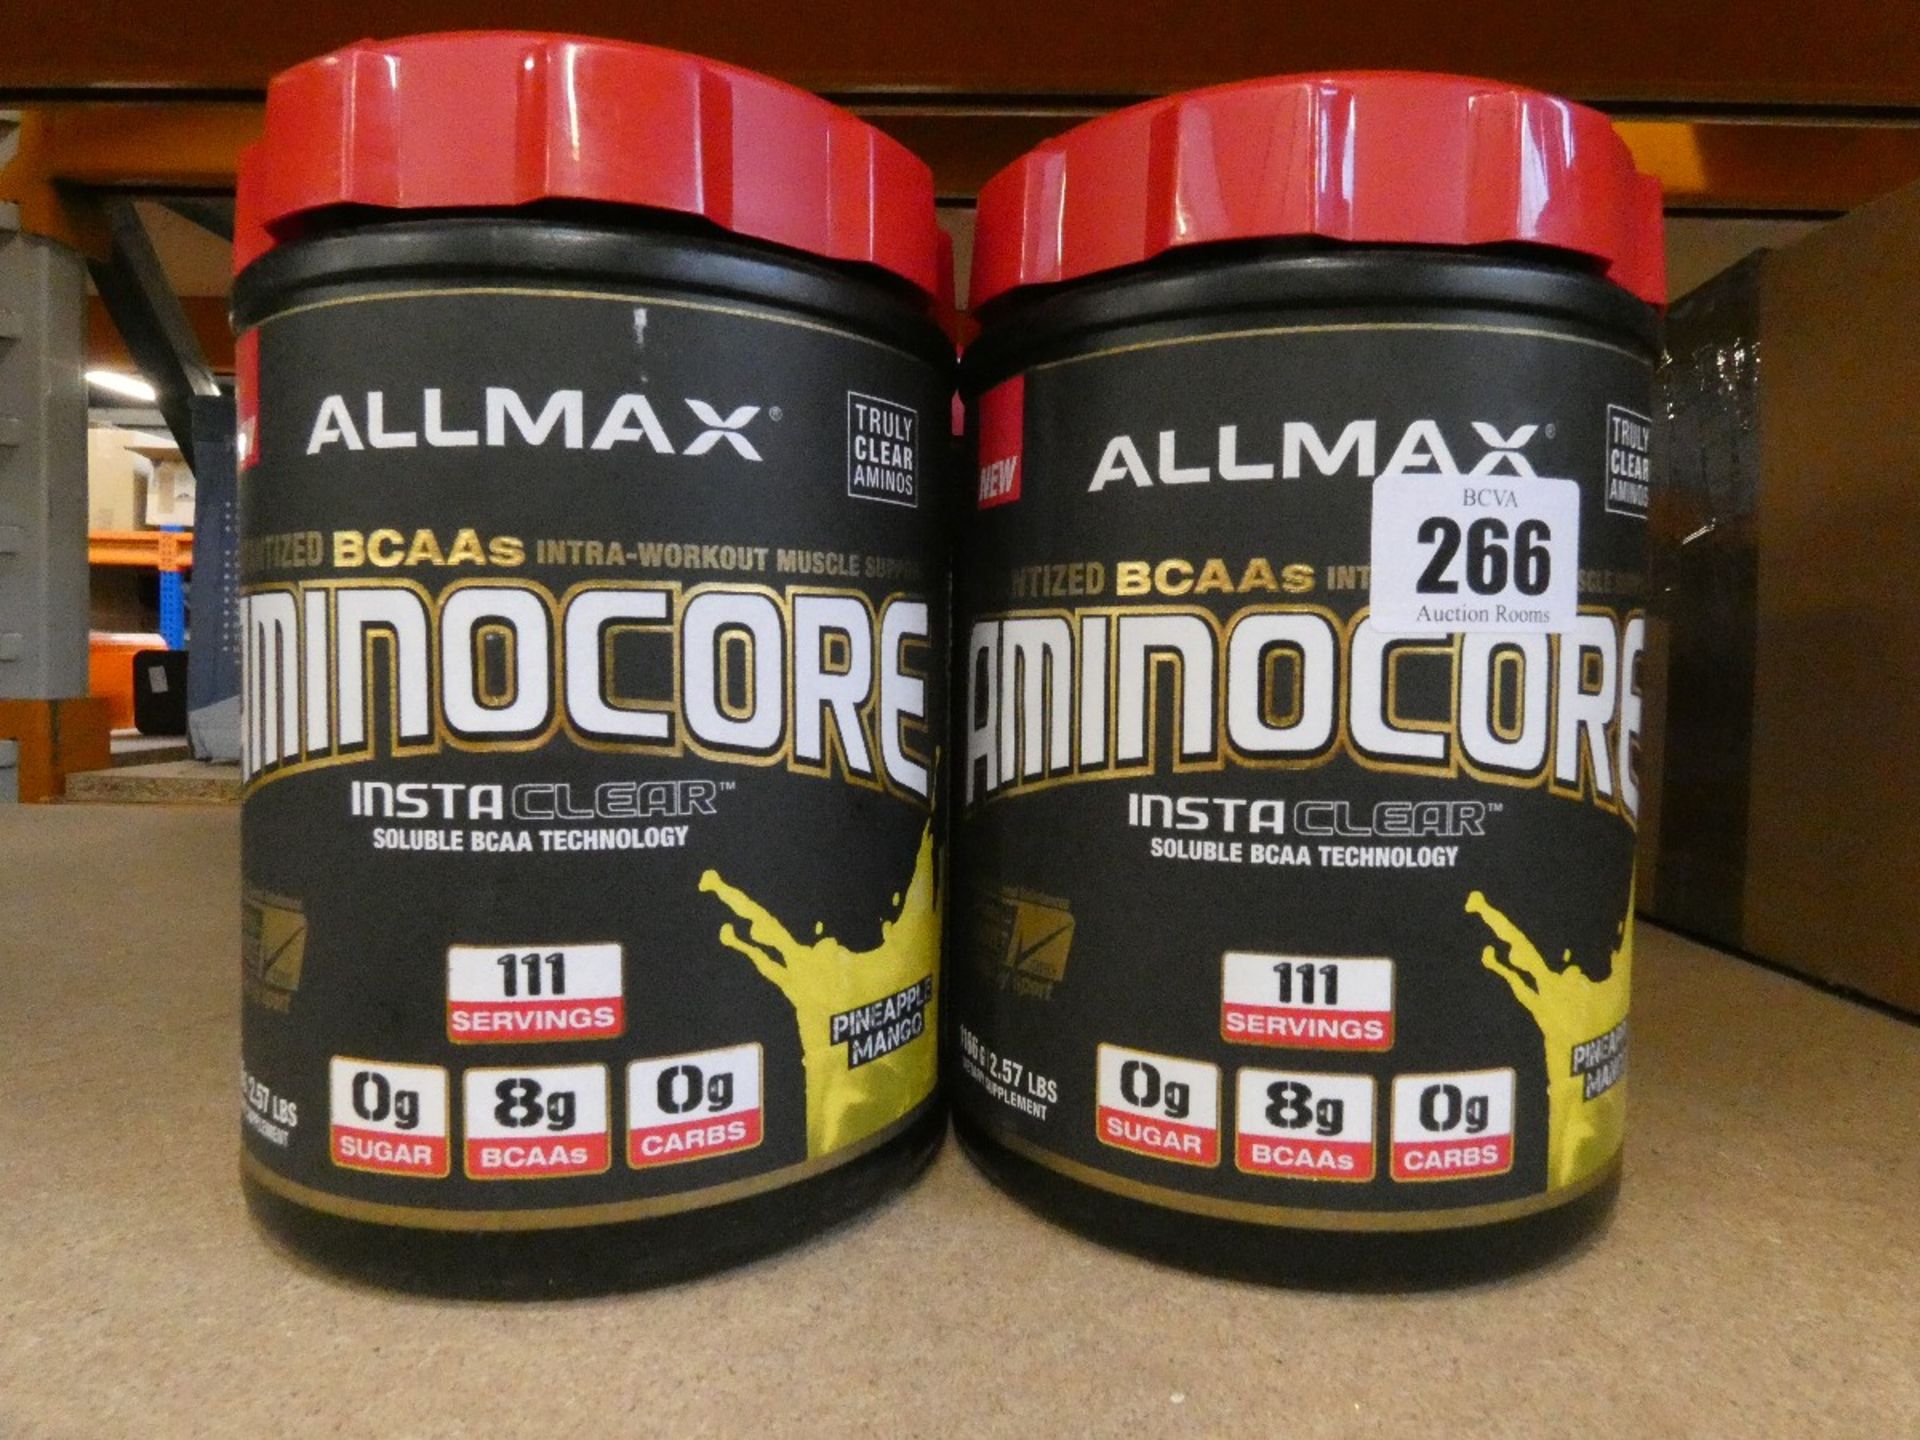 Four Allmax Aminocore Instaclear 1116g/111 servings dietary supplements in pineapple mango (0g